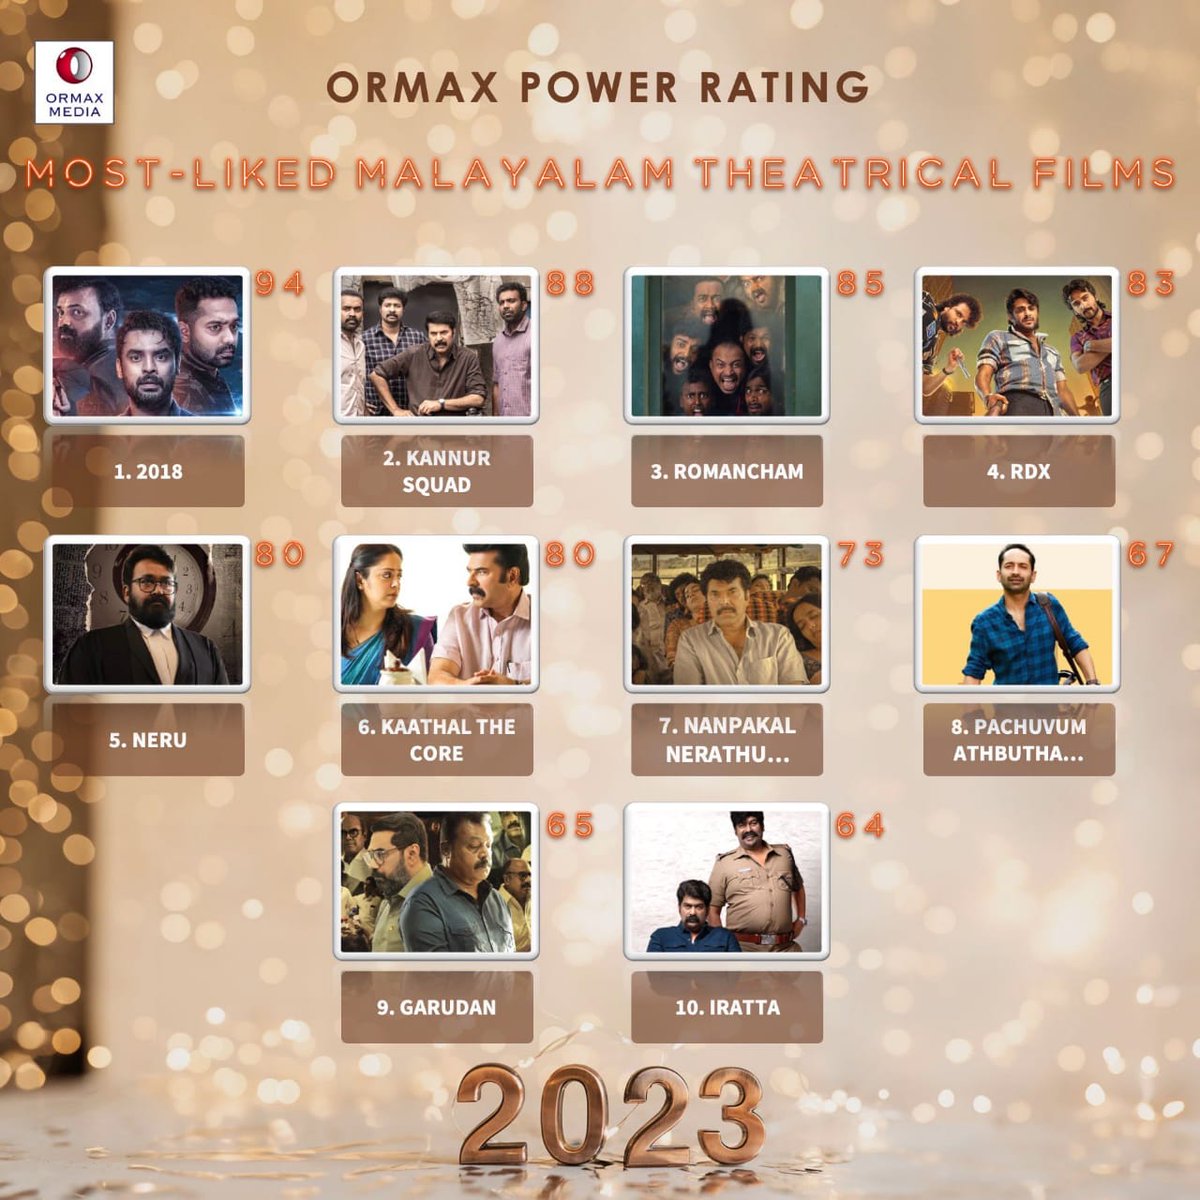 Top 10 most-liked Malayalam films of 2023, based on audience engagement
#Ormax2023 #OrmaxPowerRating
Note: Only original Malayalam language films released in theatres considered